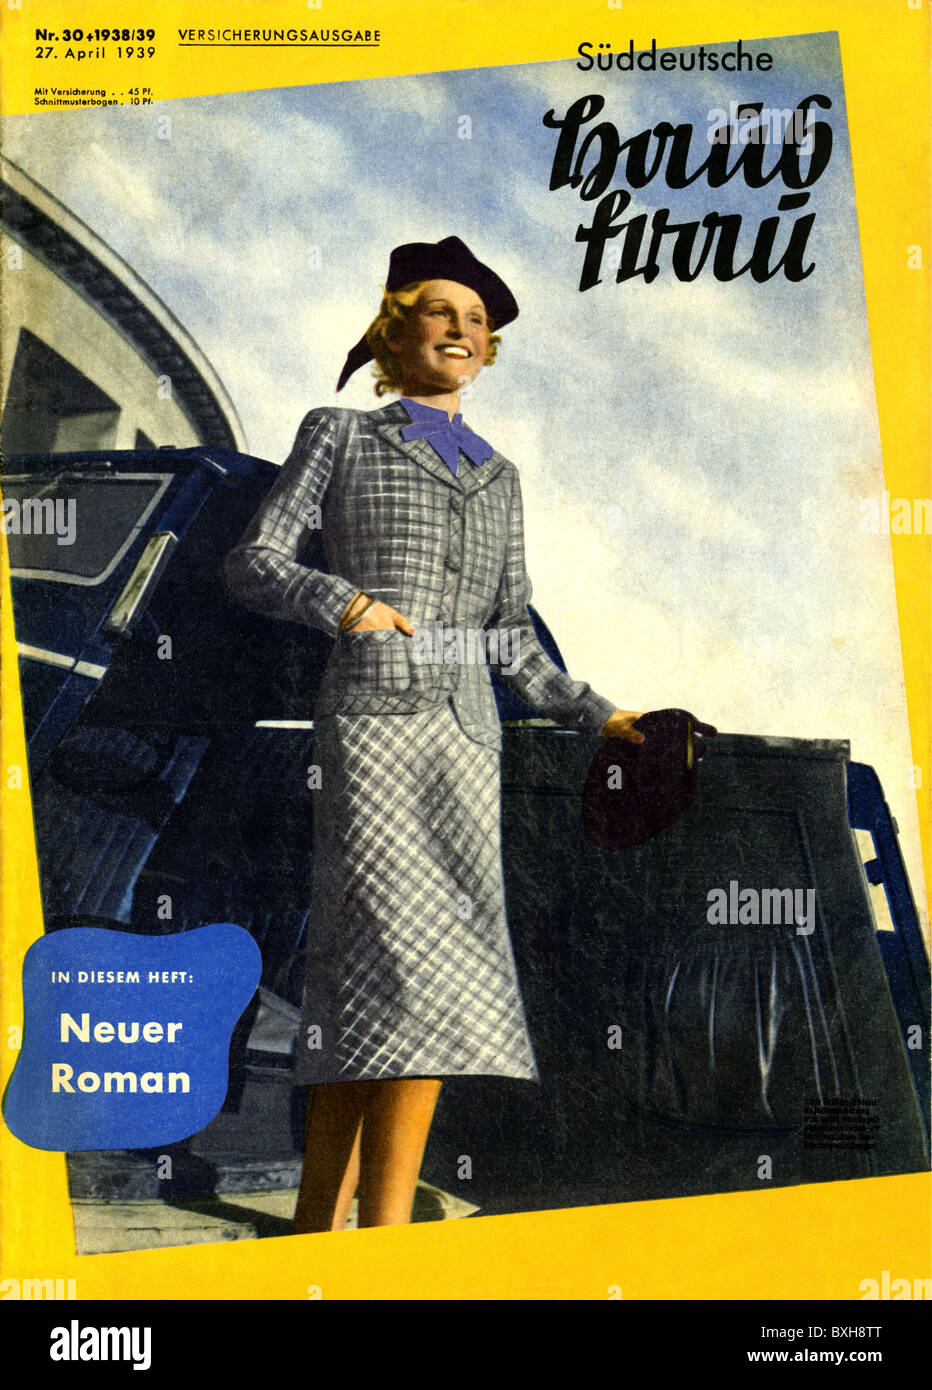 fashion, 1930s, ladie's fashion, cover of fashion magazine 'Sueddeutsche Hausfrau', Germany, April 1939, Additional-Rights-Clearences-Not Available Stock Photo